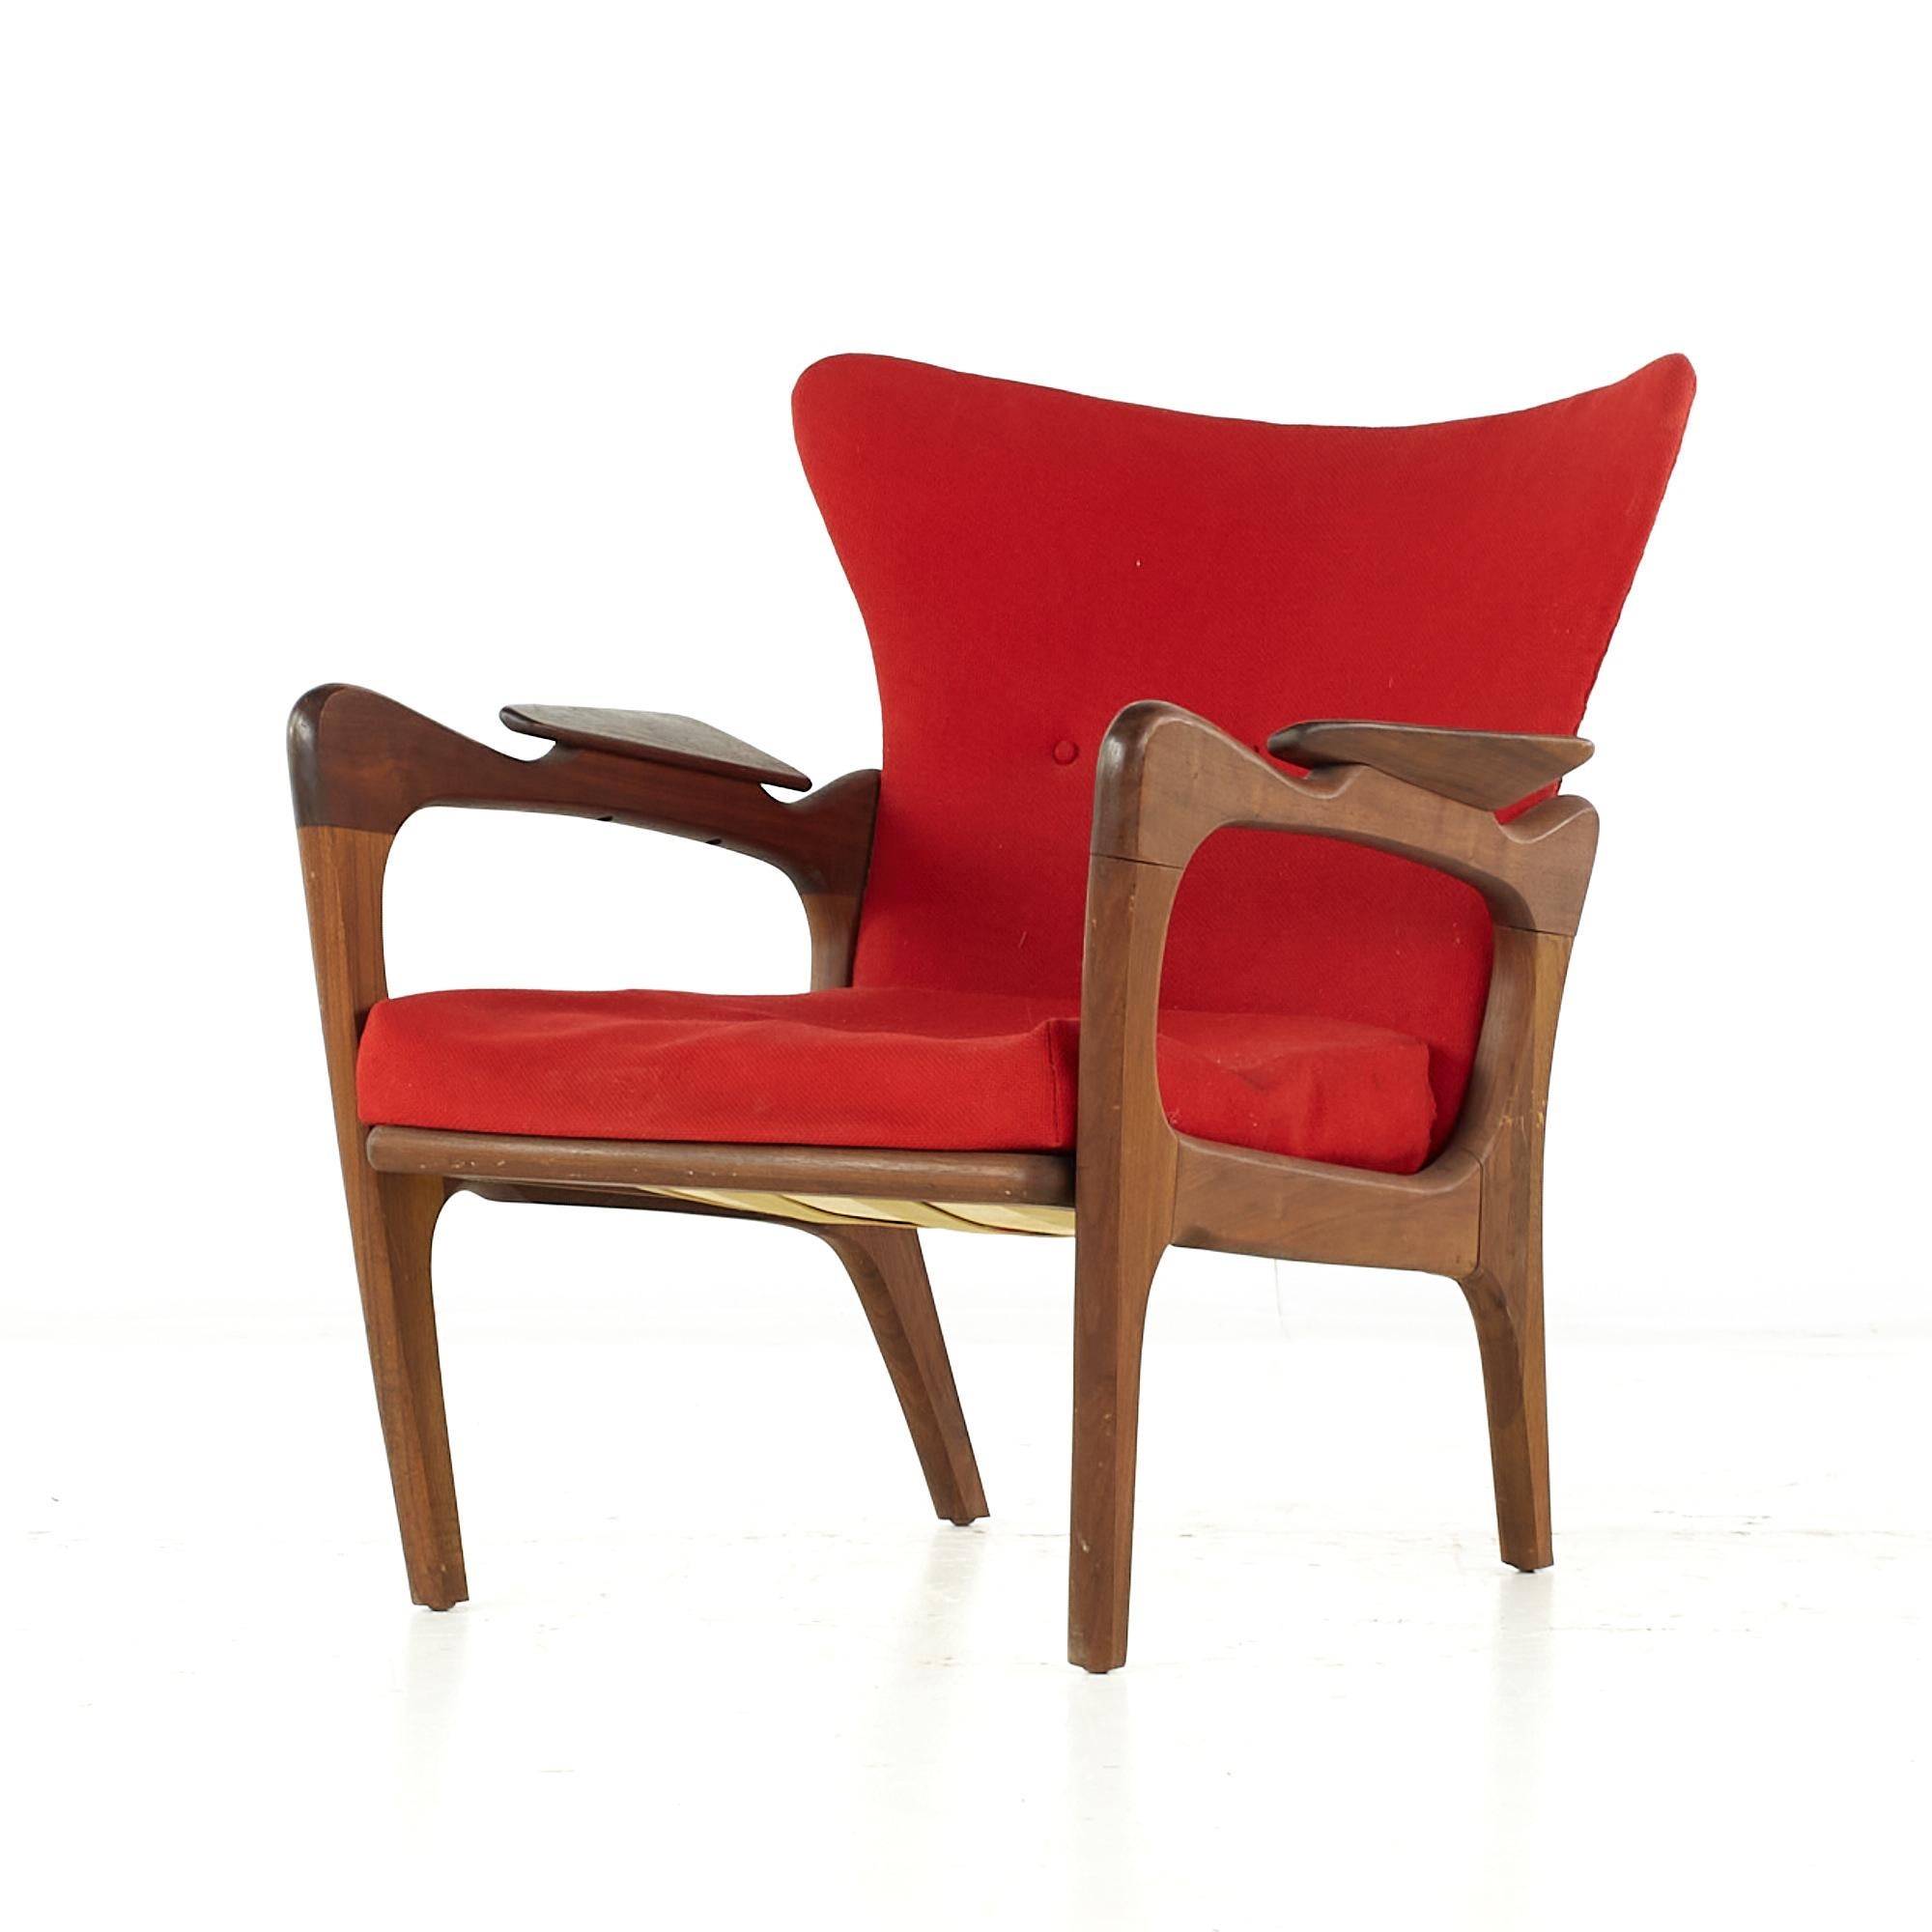 Late 20th Century Adrian Pearsall for Craft Associates Mid Century Lounge Chair - Pair For Sale